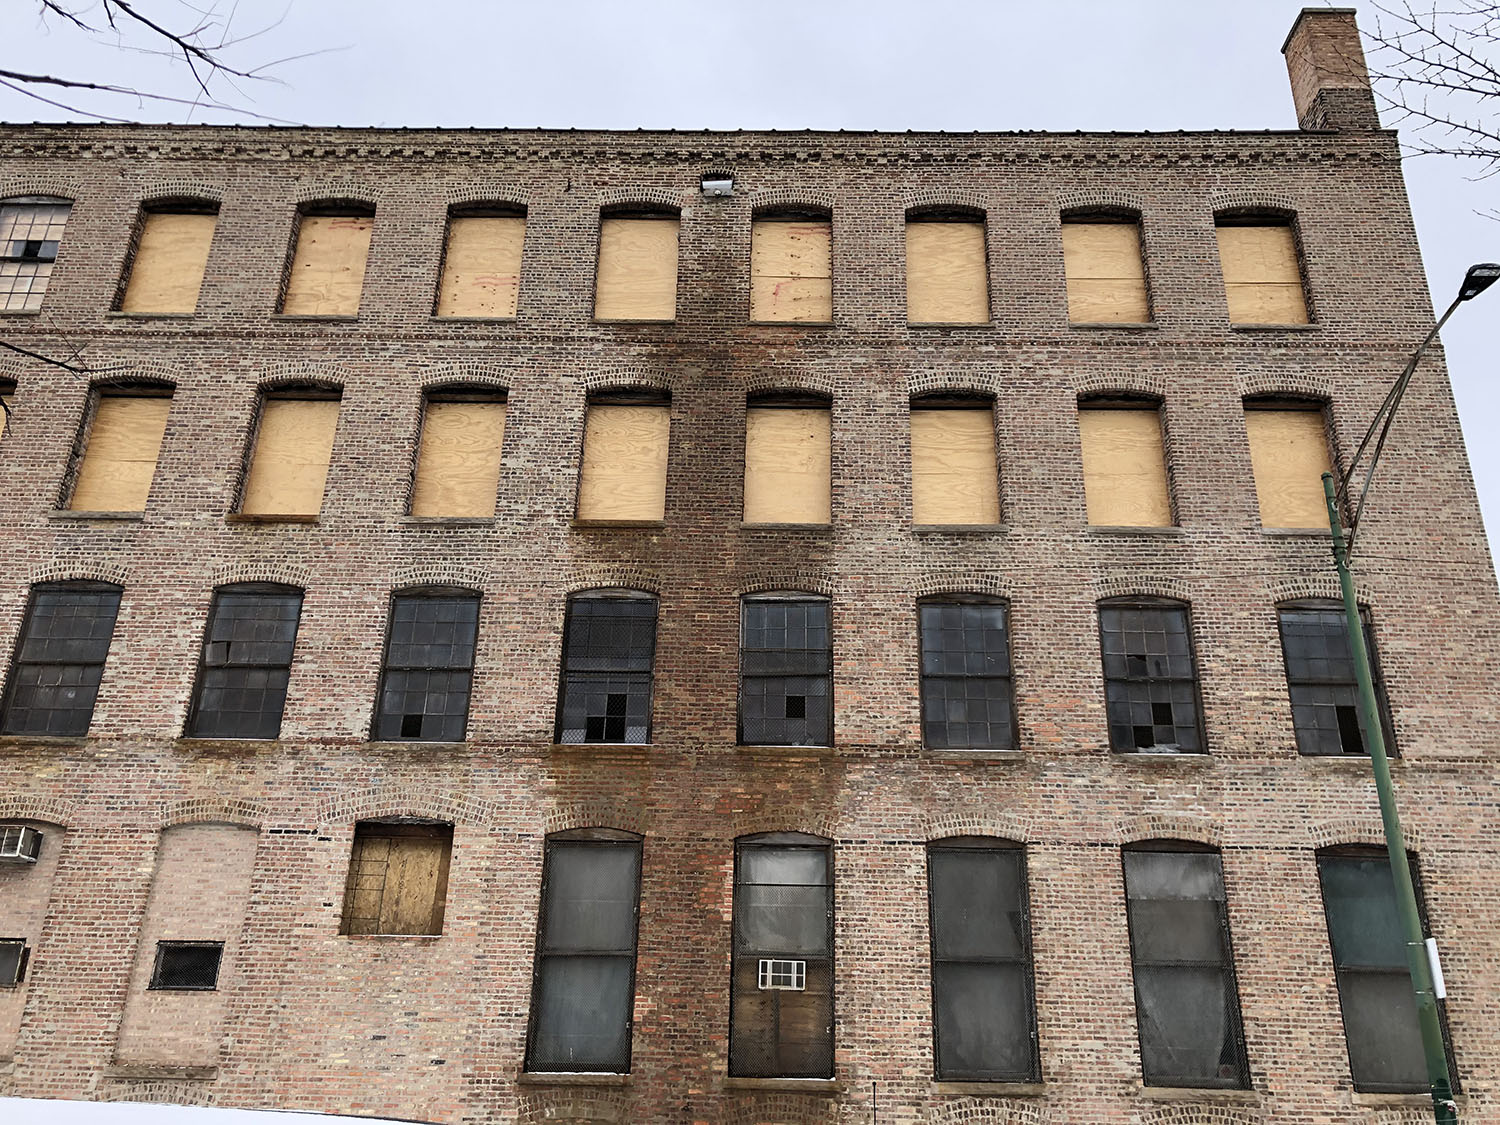 View of 920 W Cullerton Street. Image by Lukas Kugler